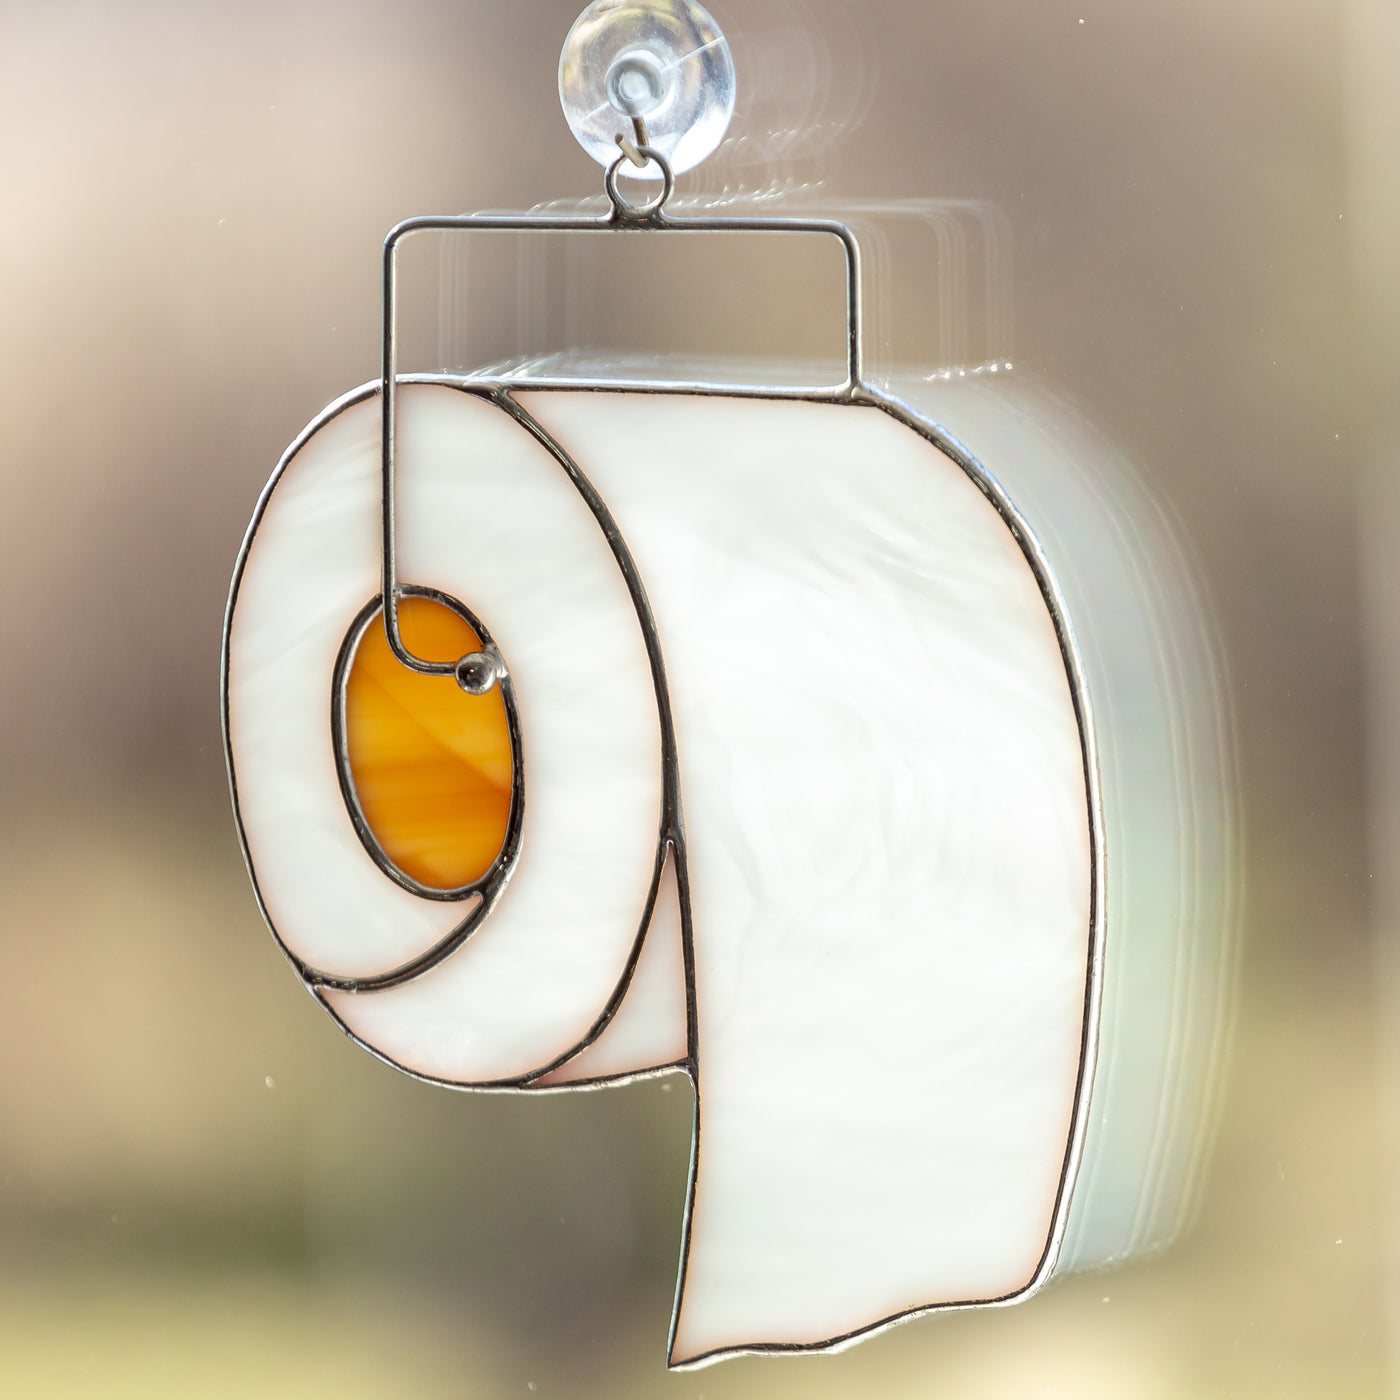 Zoomed stained glass toilet paper suncatcher